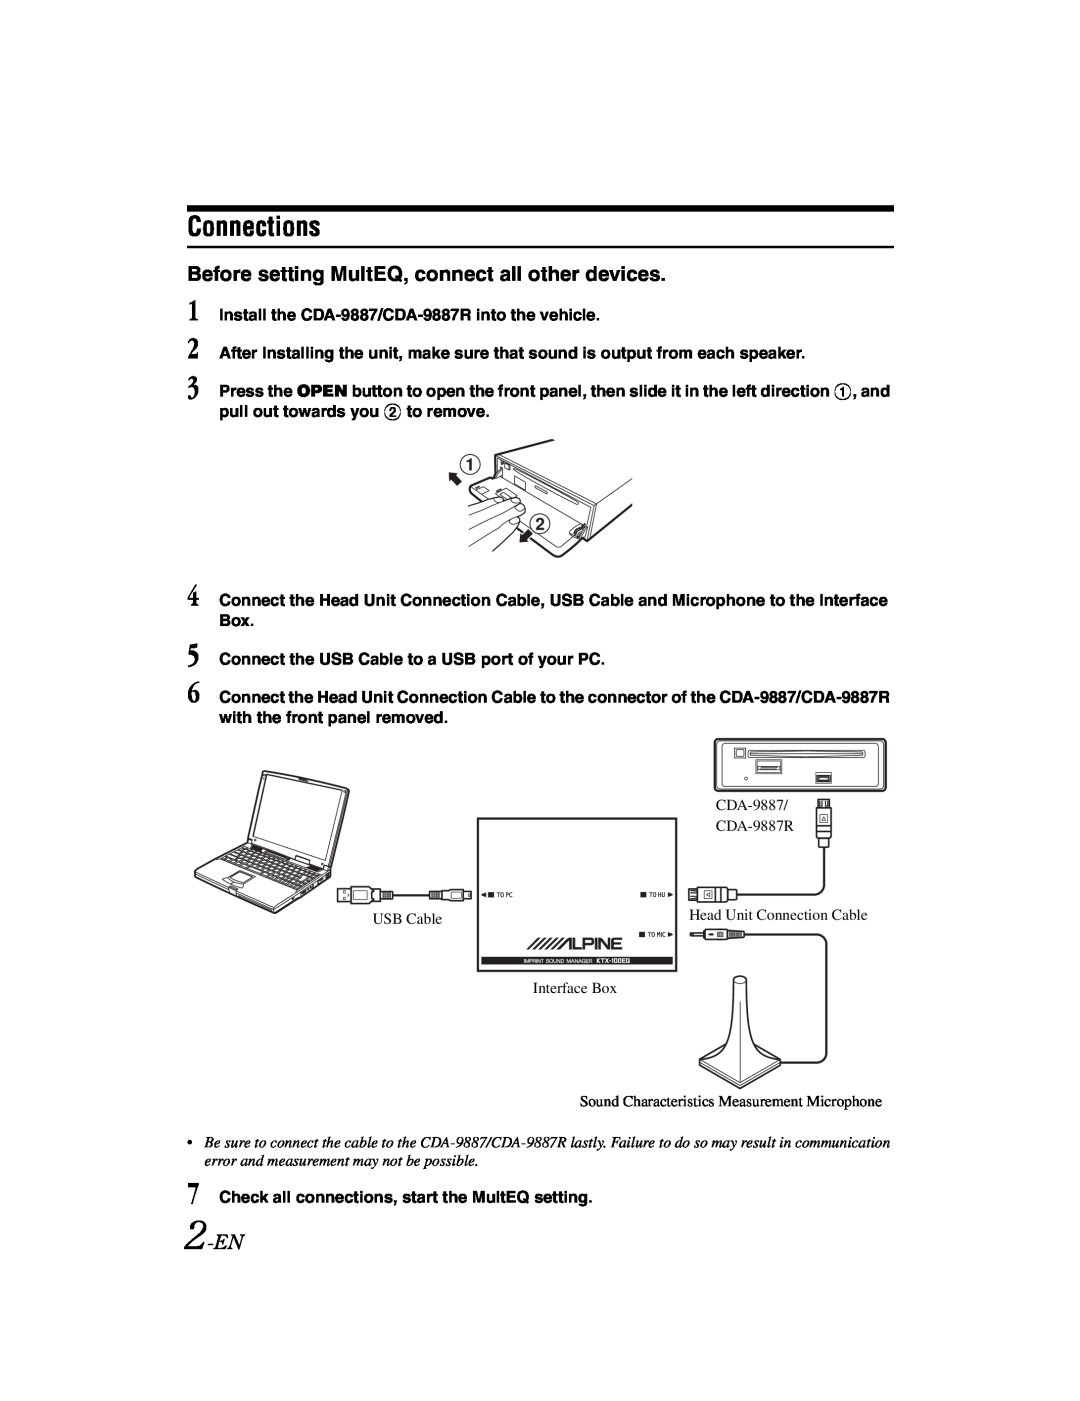 Alpine KTX-100EQ owner manual Connections, Before setting MultEQ, connect all other devices, 2-EN 